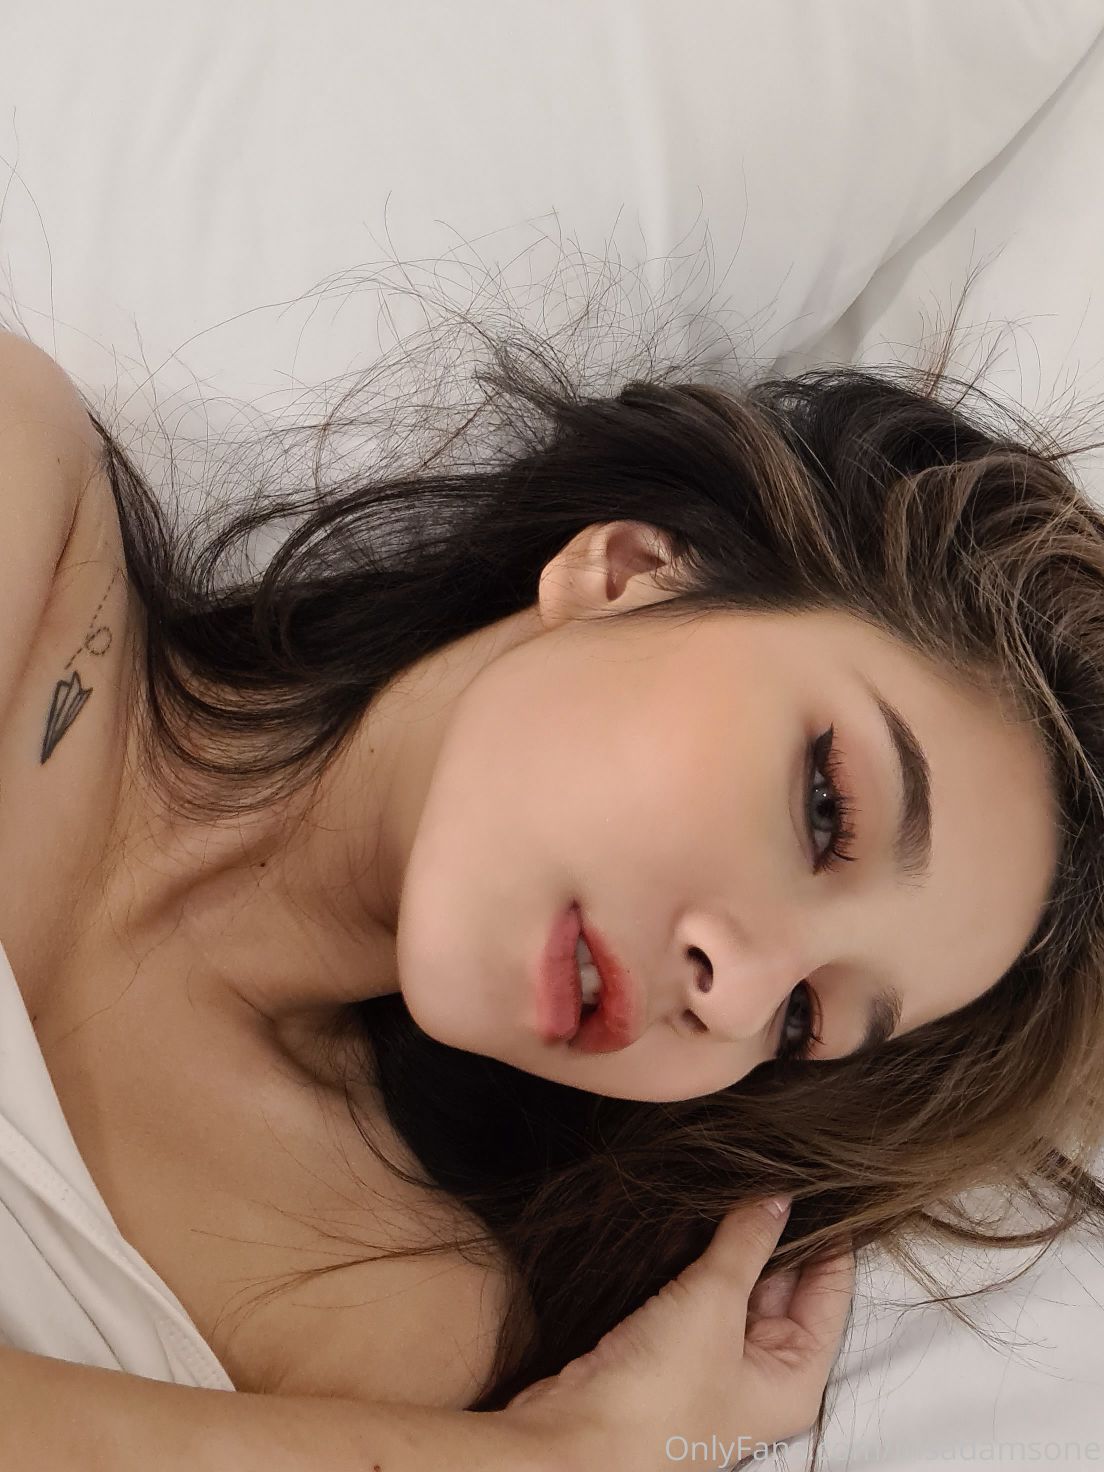 AsianOnlyfans 171 186 20210822